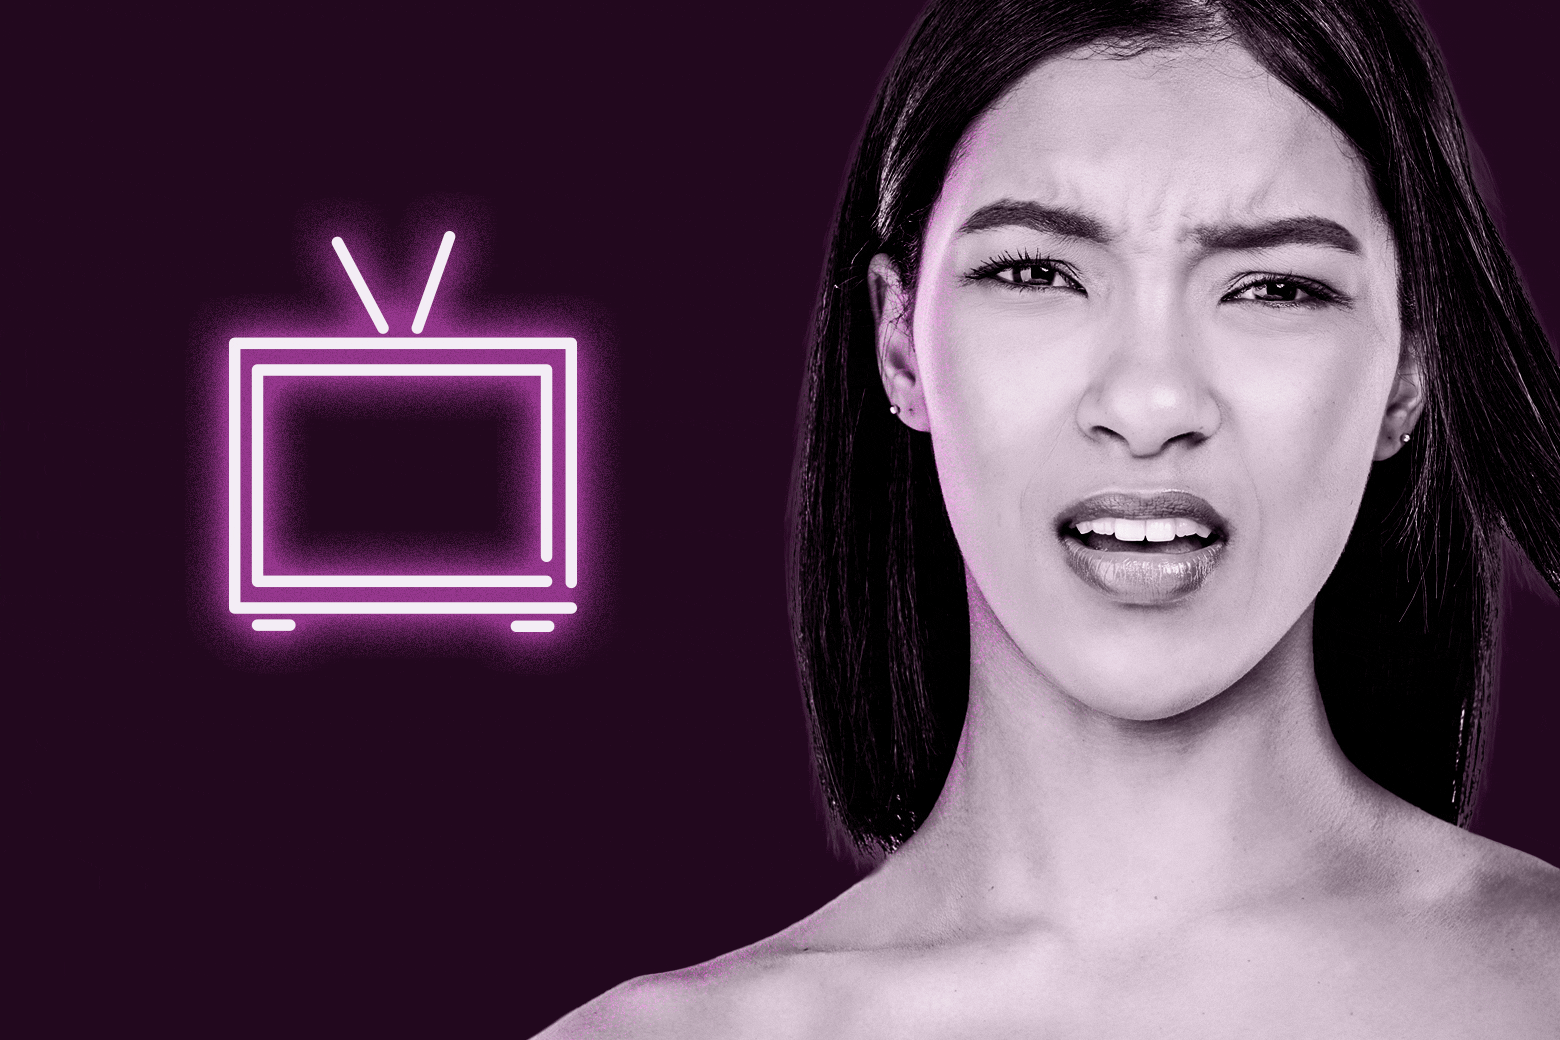 Woman looking annoyed, a graphic of a TV.